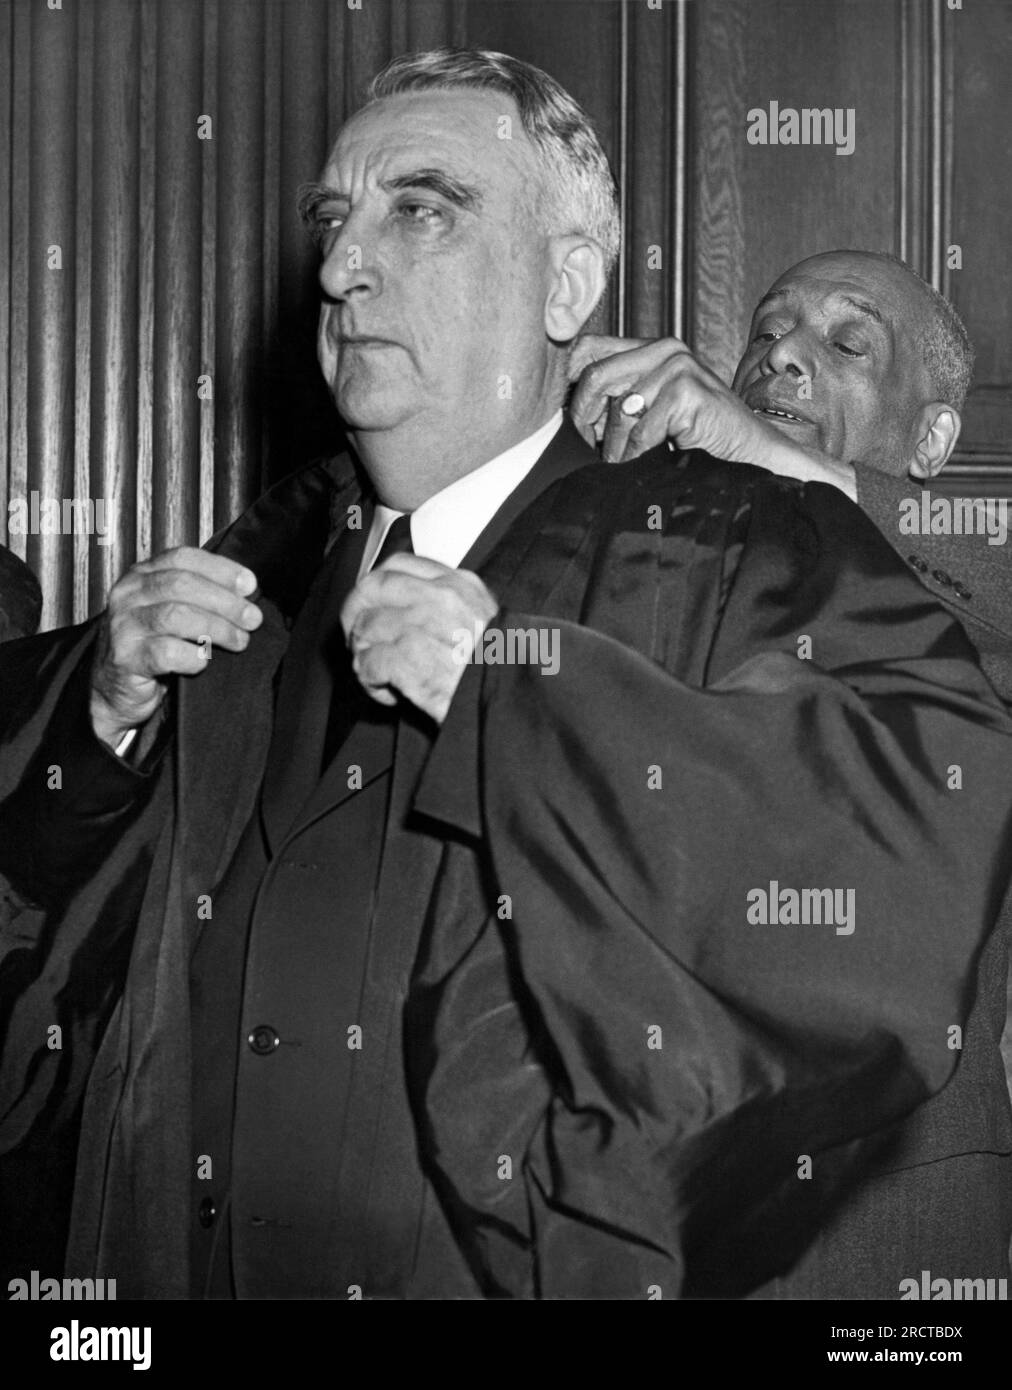 Washington, D.C.:  October 7, 1946. The new Chief Justice of the Supreme Court, Fred Vinson, is helped from his robes by attendant Robert Marshall after completing his first day as presiding judge of the nation's highest court. Stock Photo